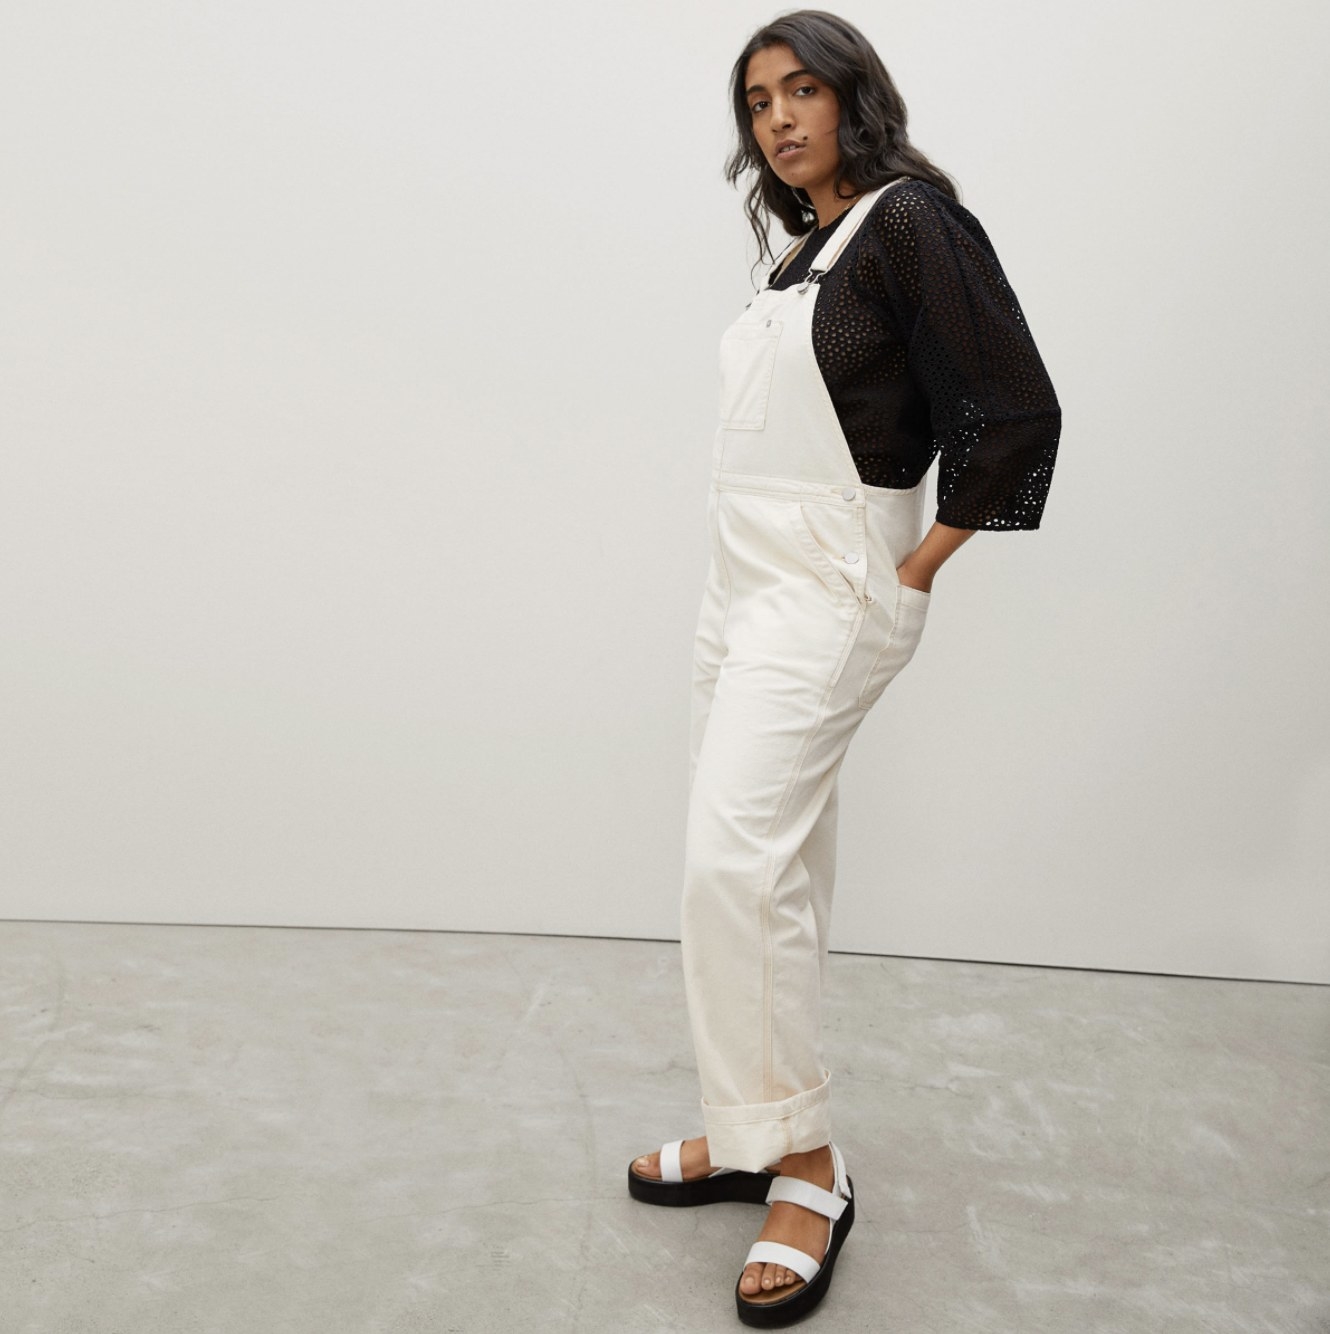 Model wearing the white overalls with black shirt and sandals